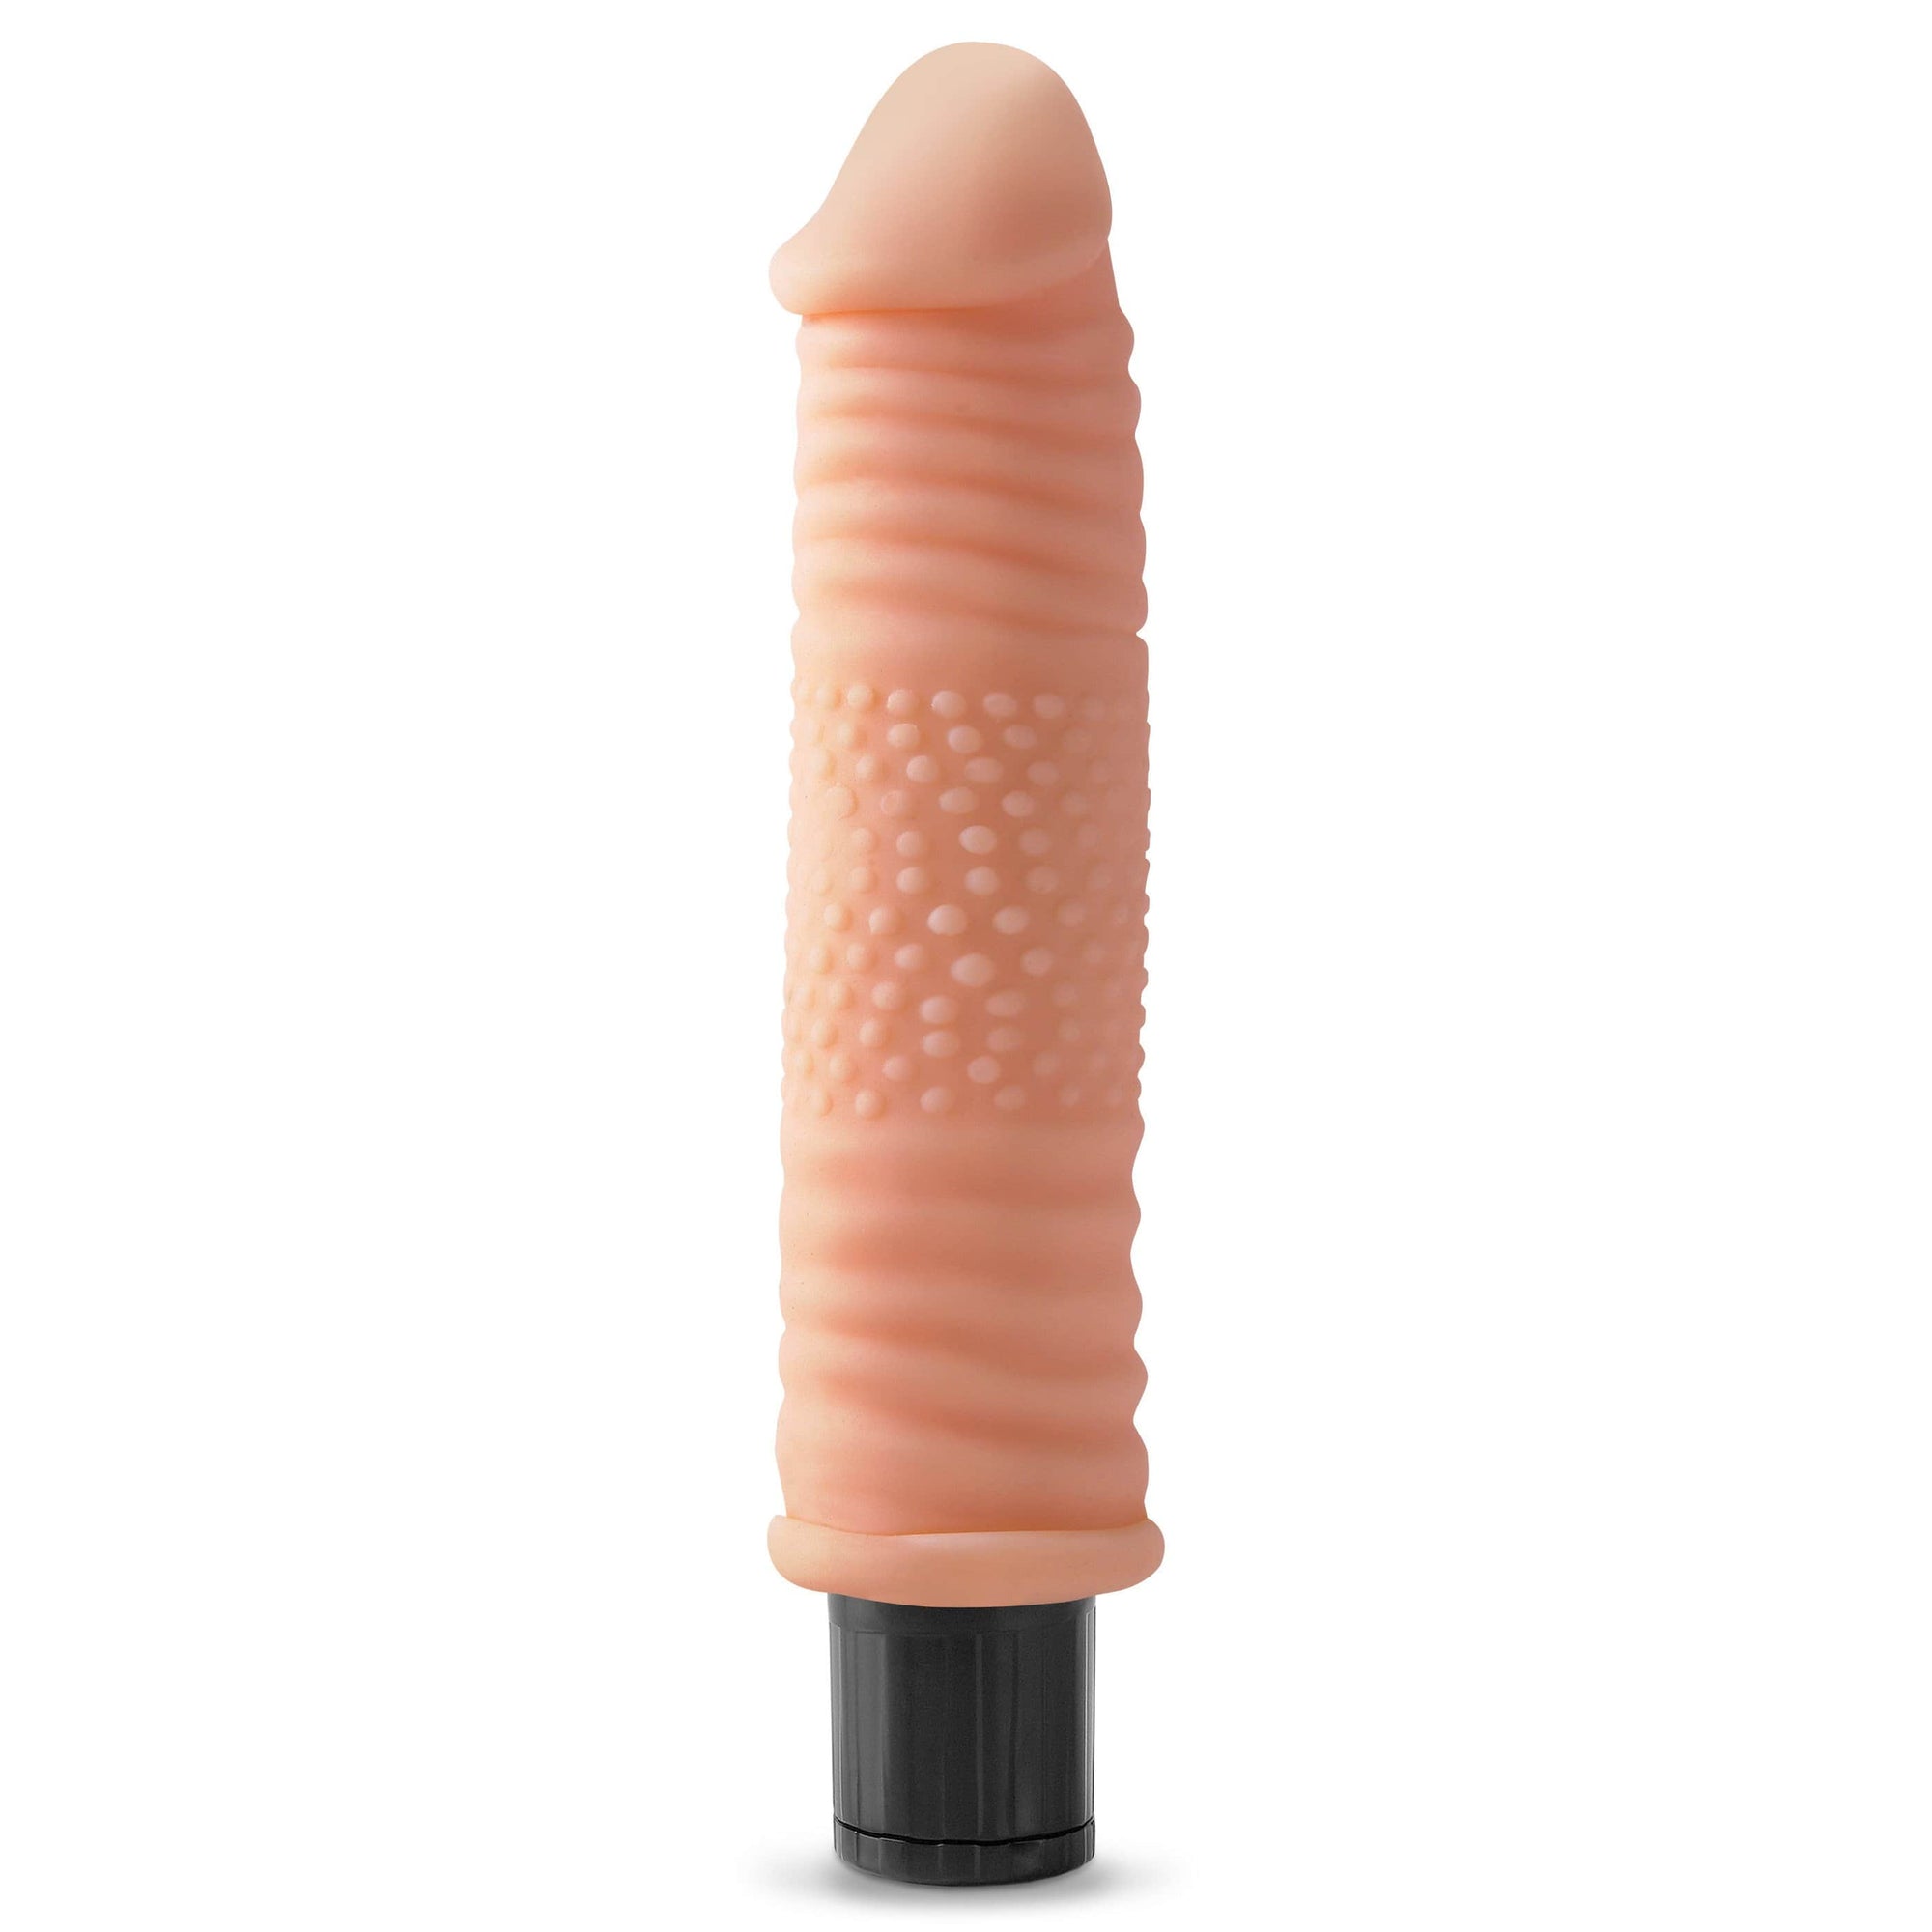 Pipedream - Real Feel No. 12 Vibrating Dildo (Beige) -  Realistic Dildo w/o suction cup (Vibration) Non Rechargeable  Durio.sg